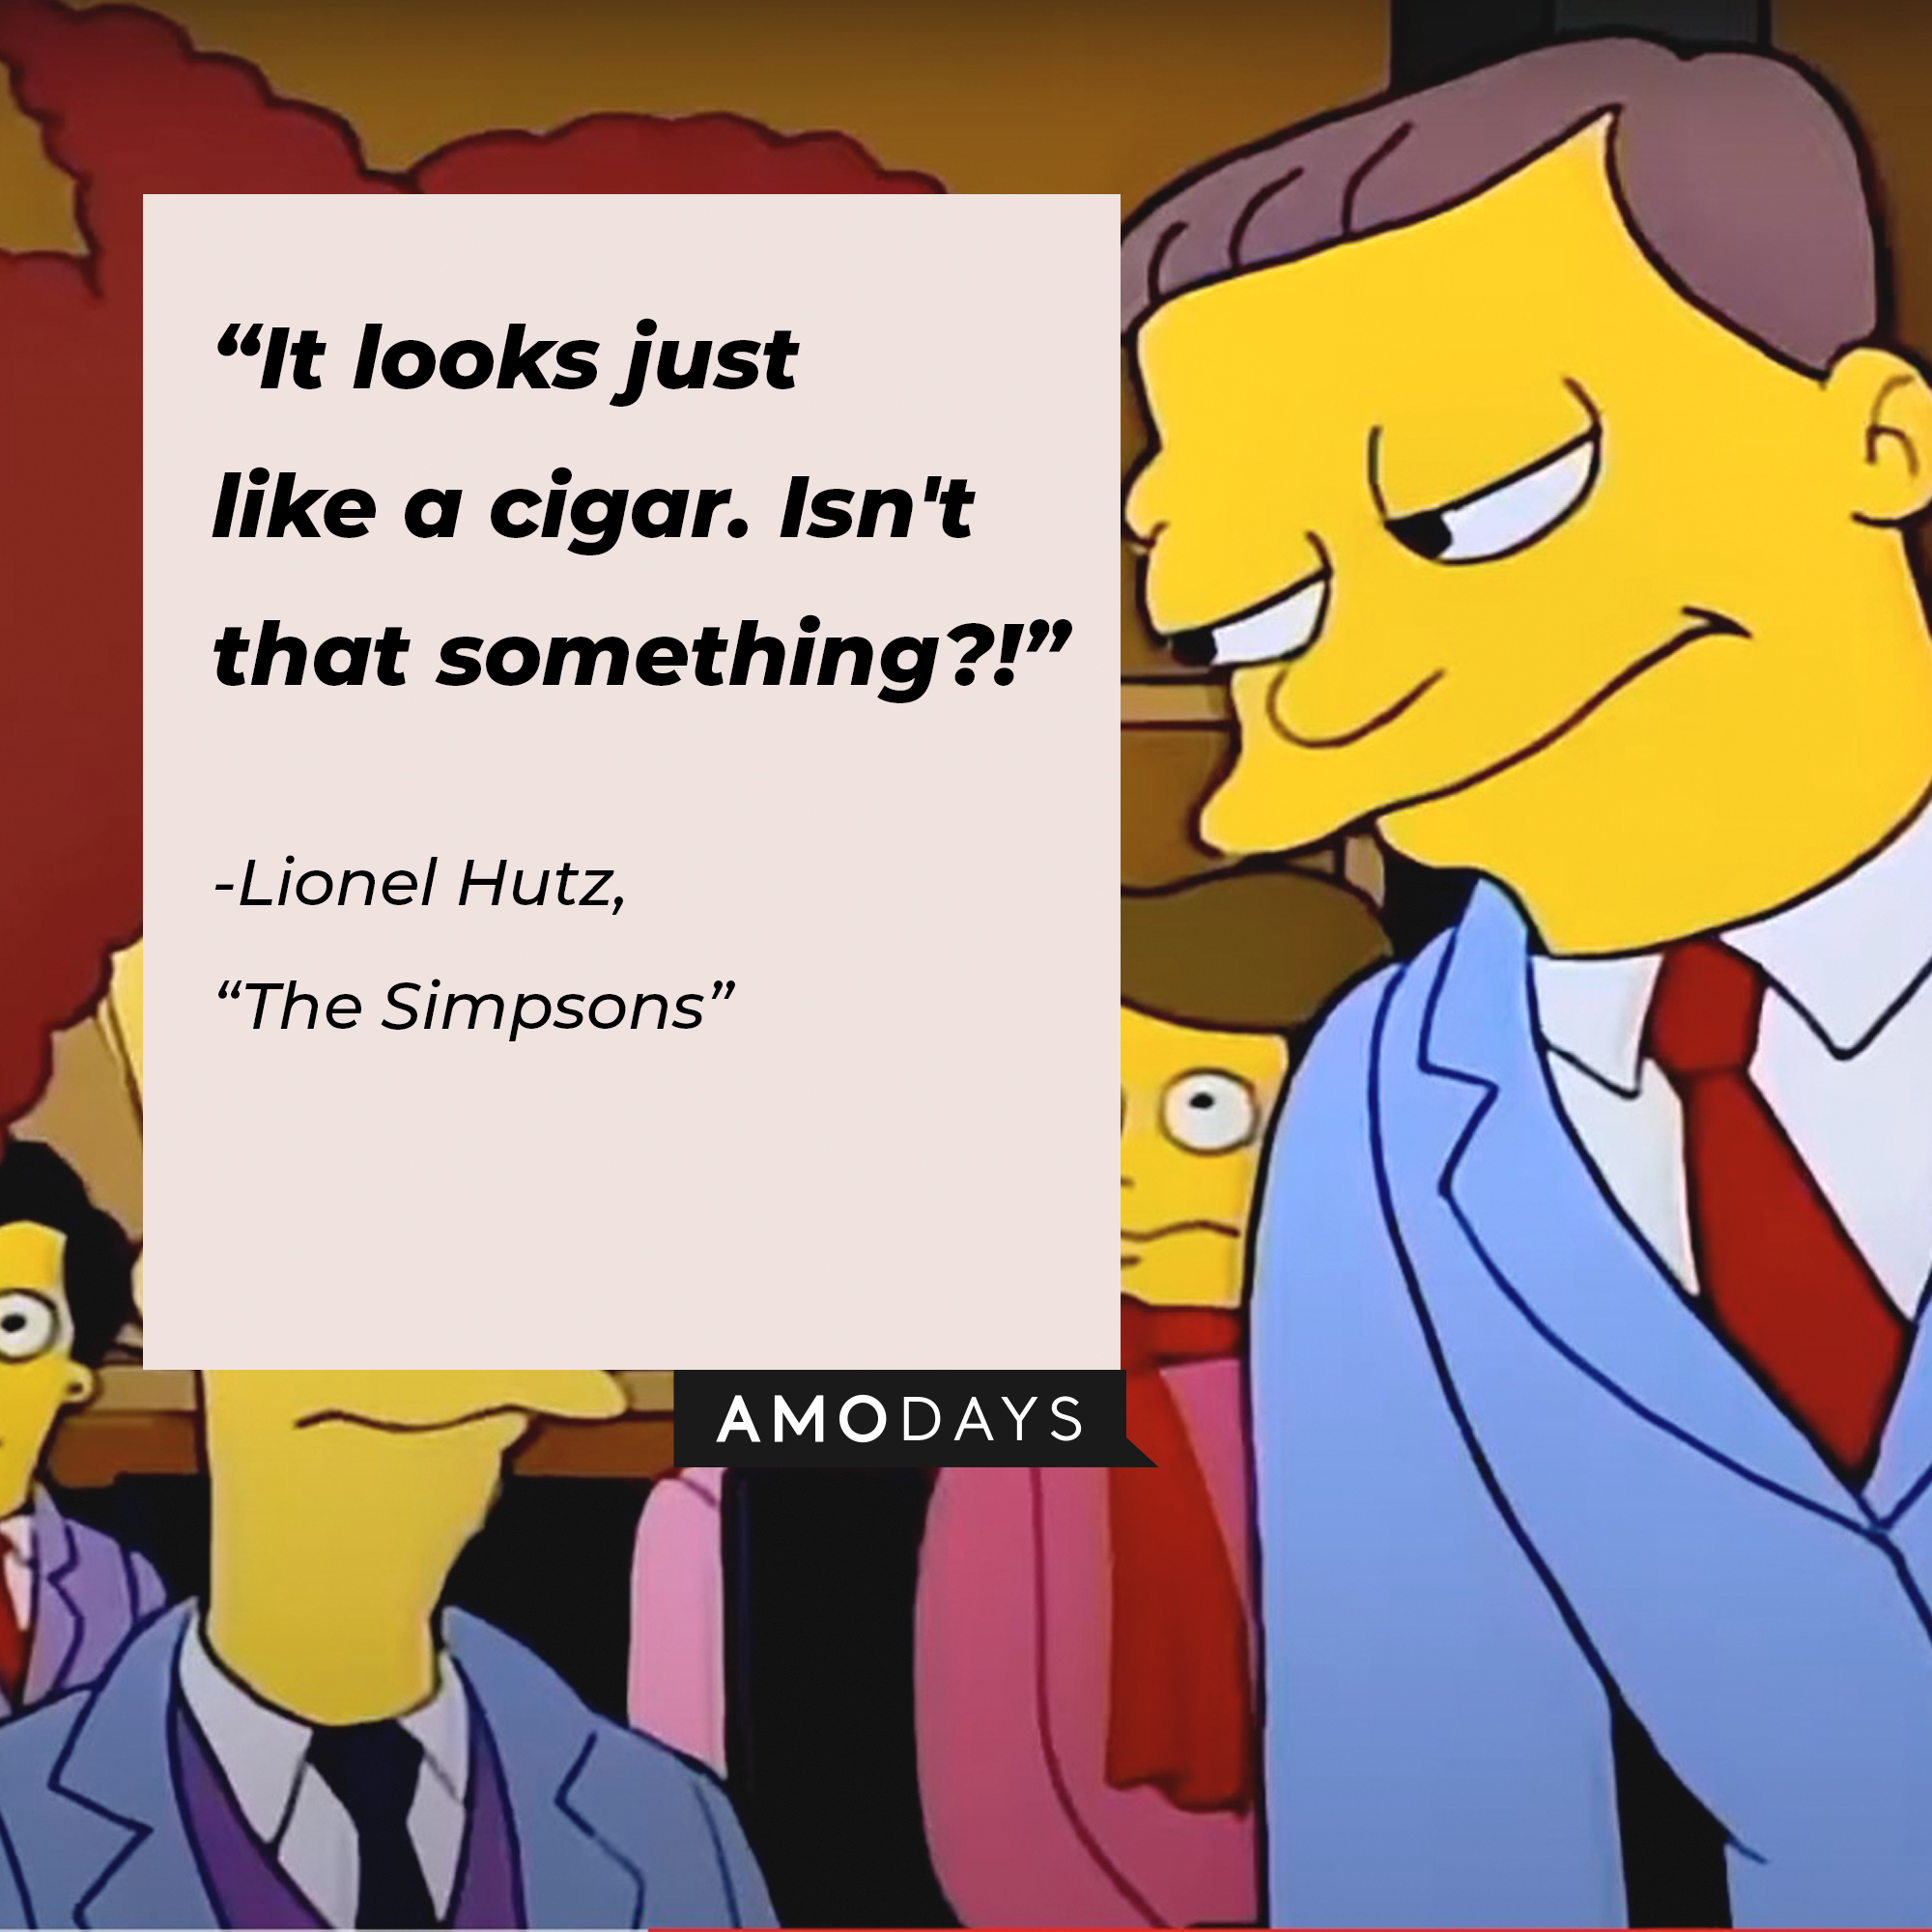 Lionel Hutz’s quote from “The Simpsons”: “It looks just like a cigar. Isn't that something?!” | Source: facebook.com/TheSimpsons